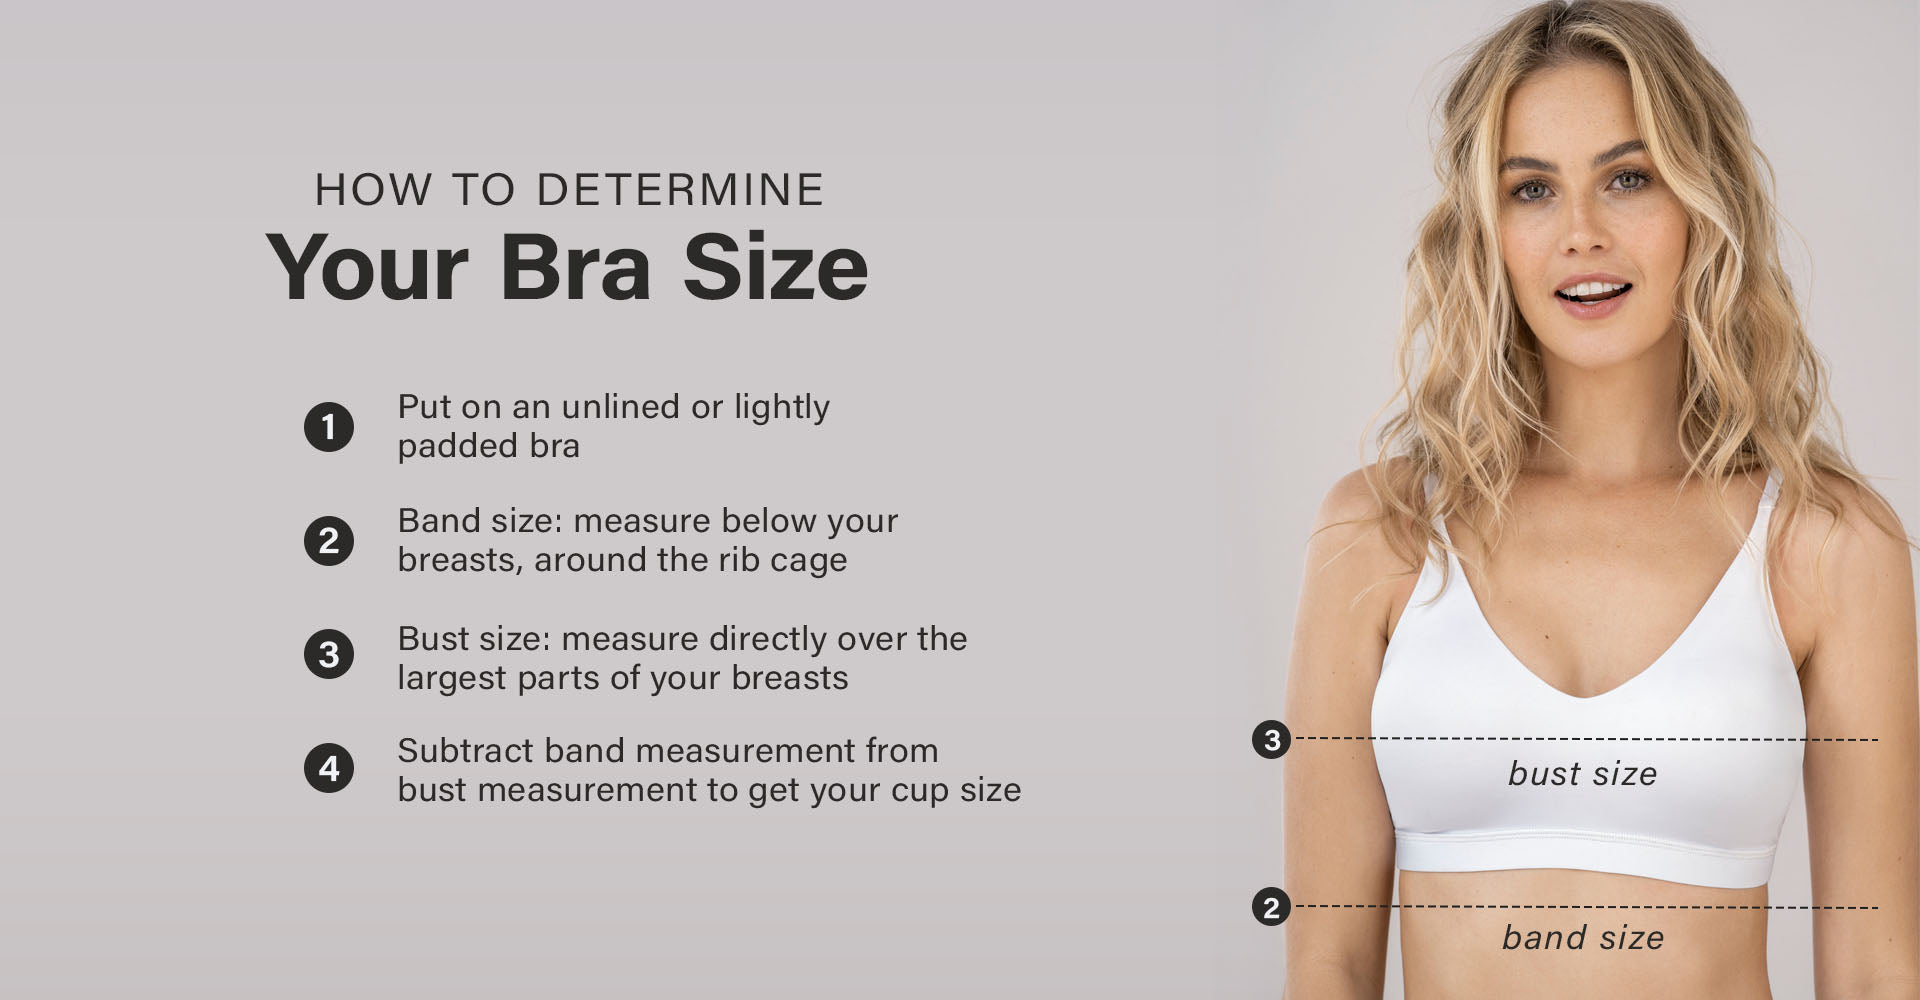 How is a Bra supposed to fit